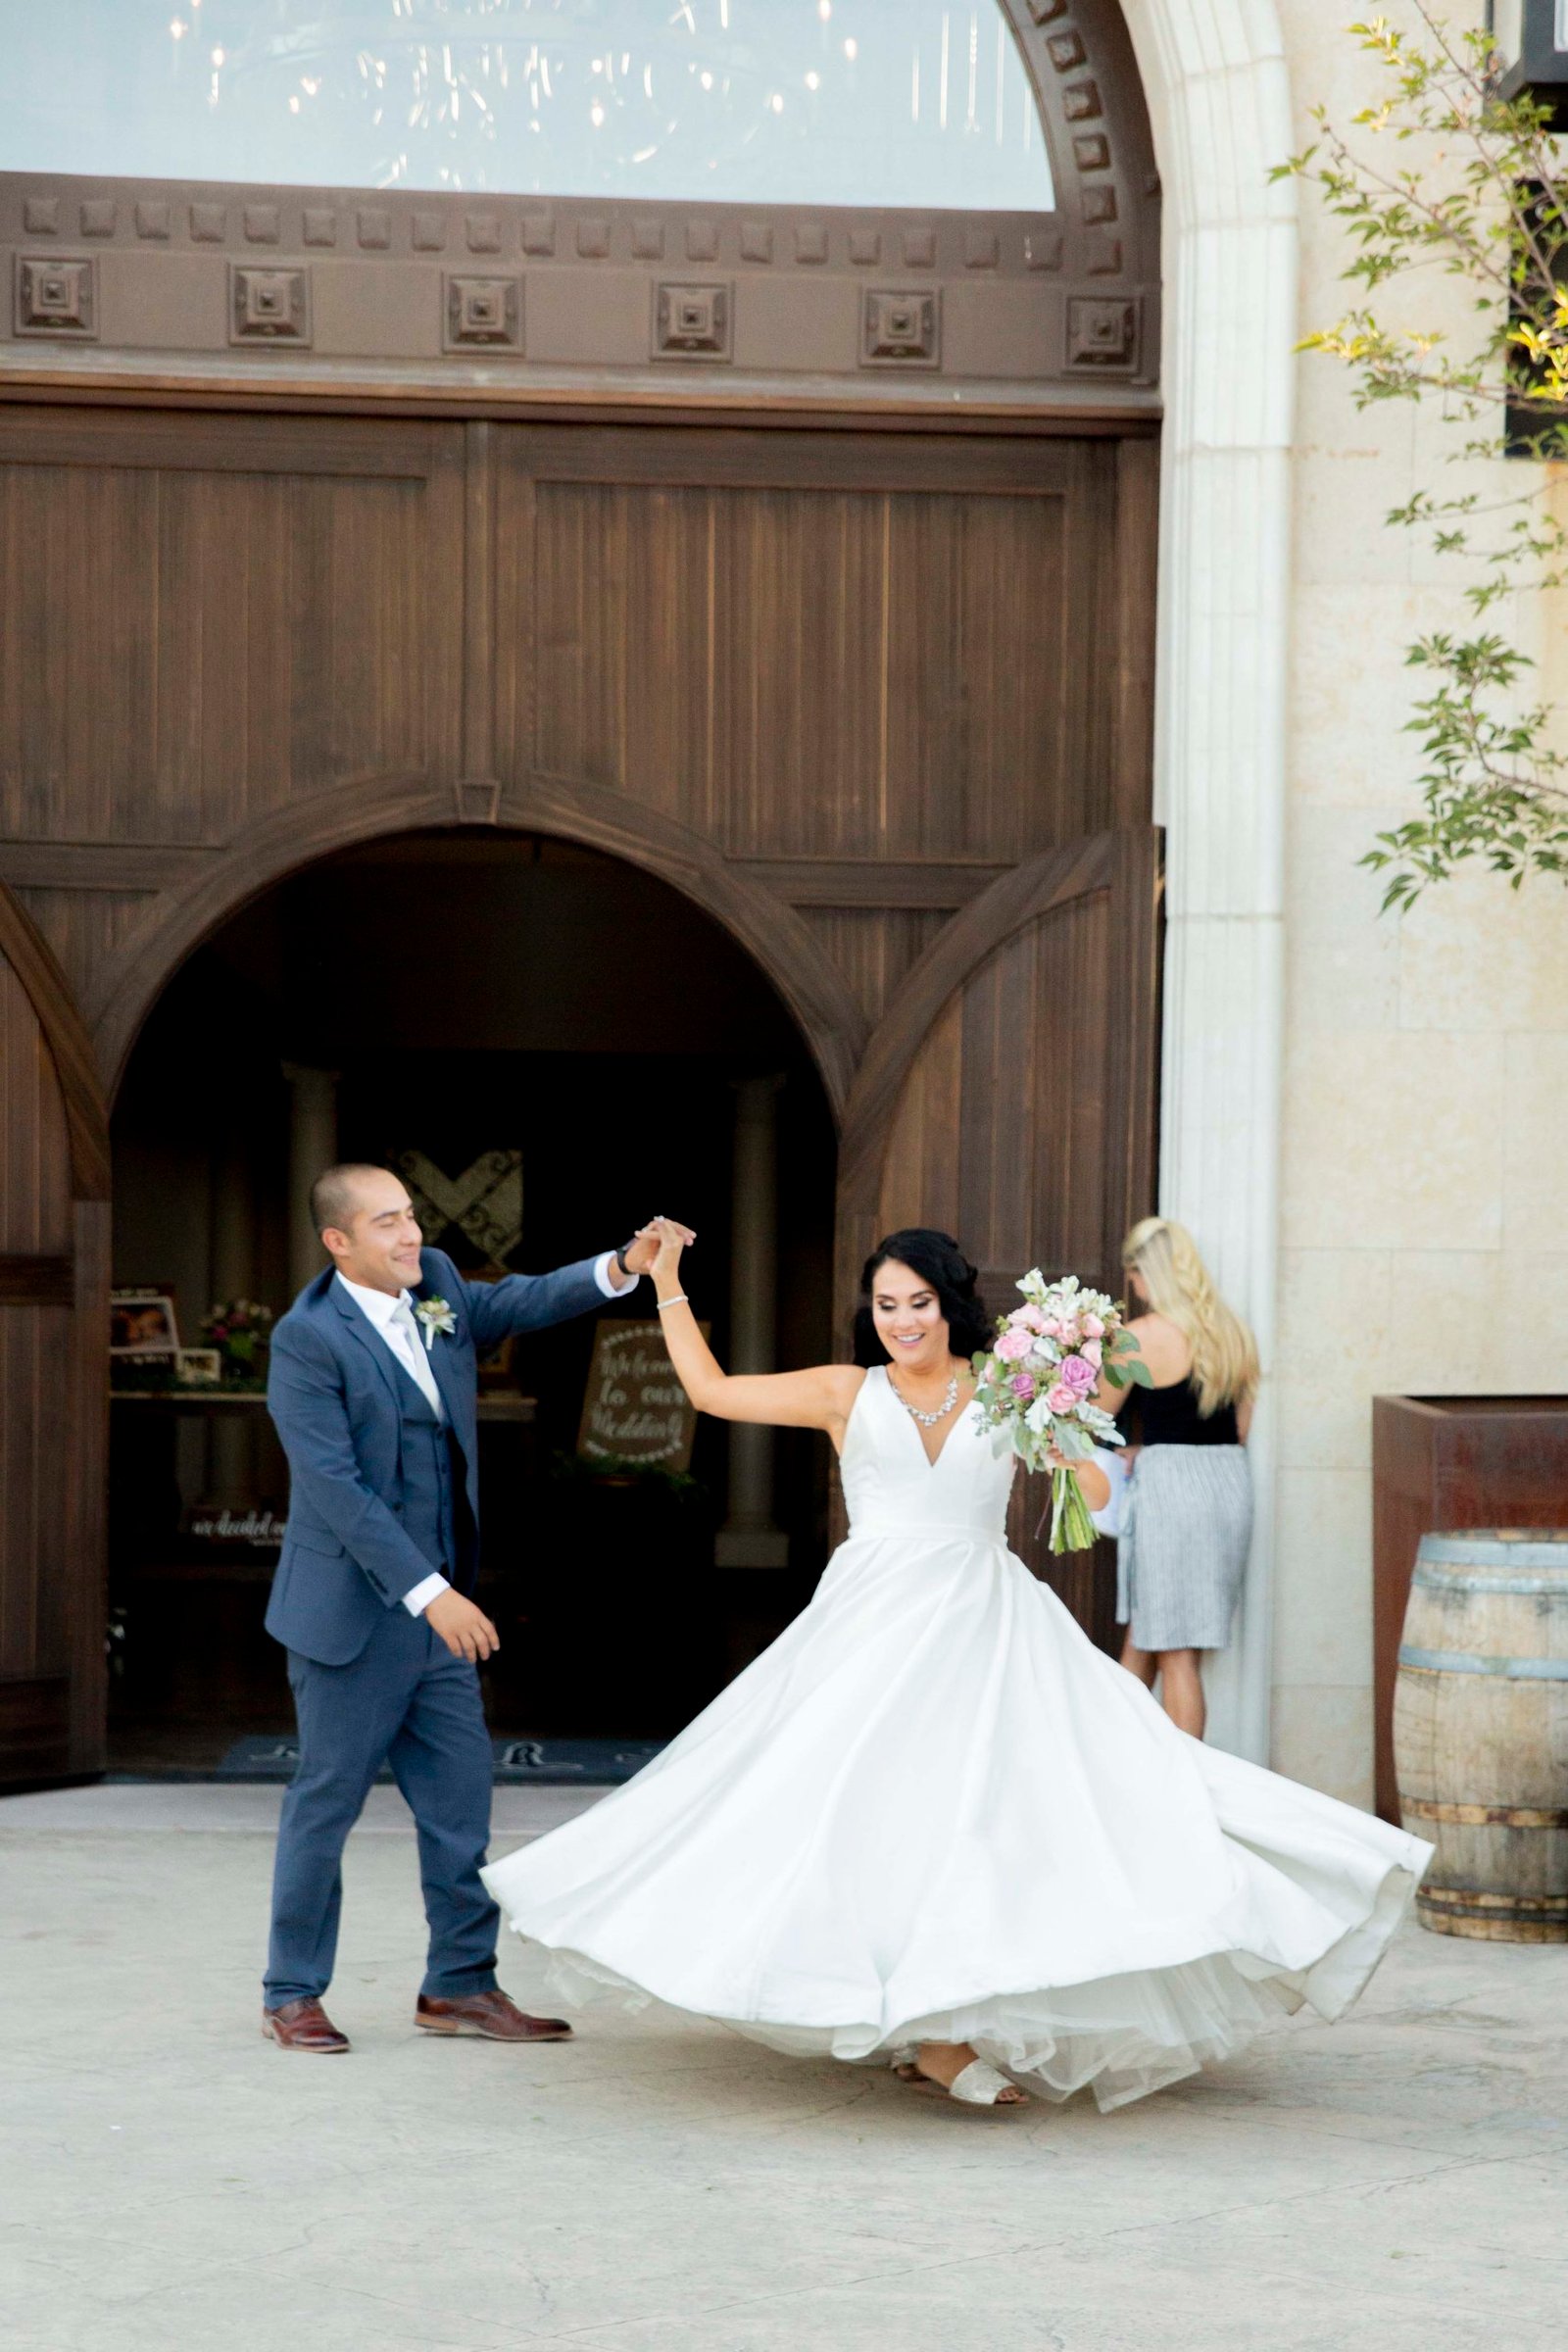 Groom twirls the bride during their grand entrance at Tooth and Nail Winery